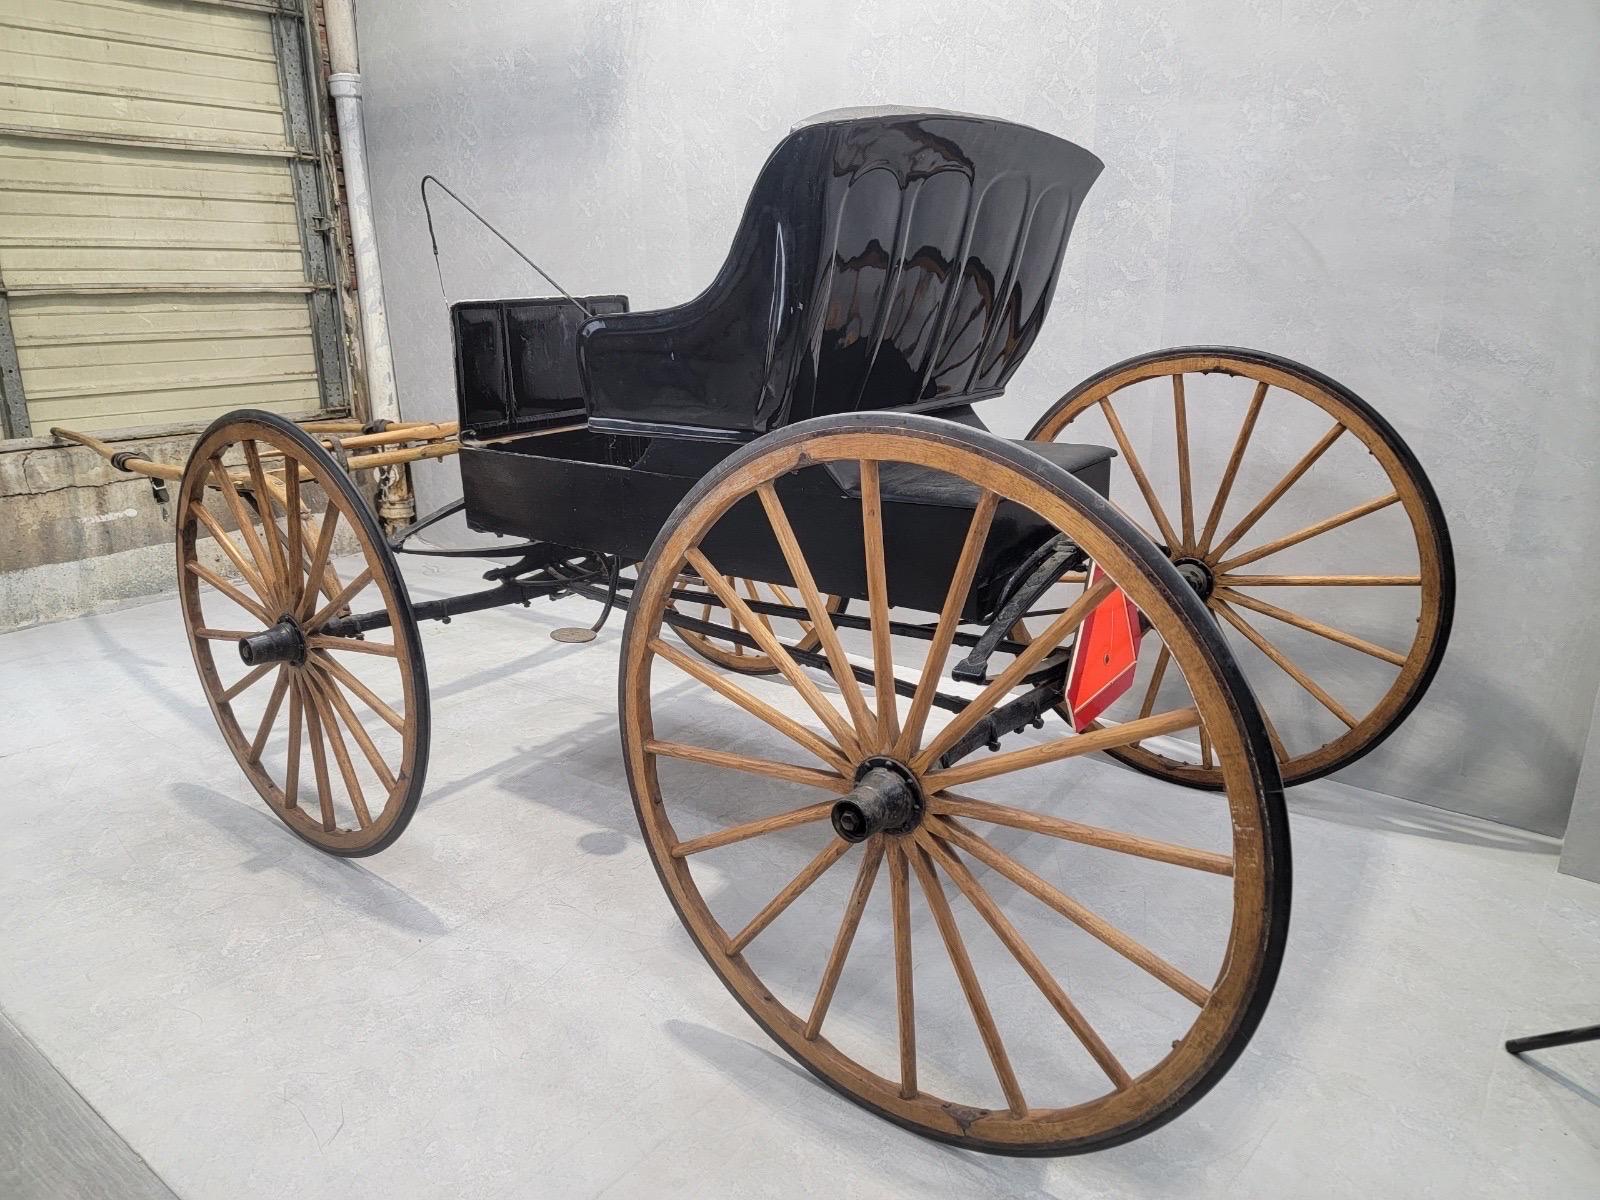 American Antique Fully Restored & Functional Horse-Pull Spring Buggy For Sale